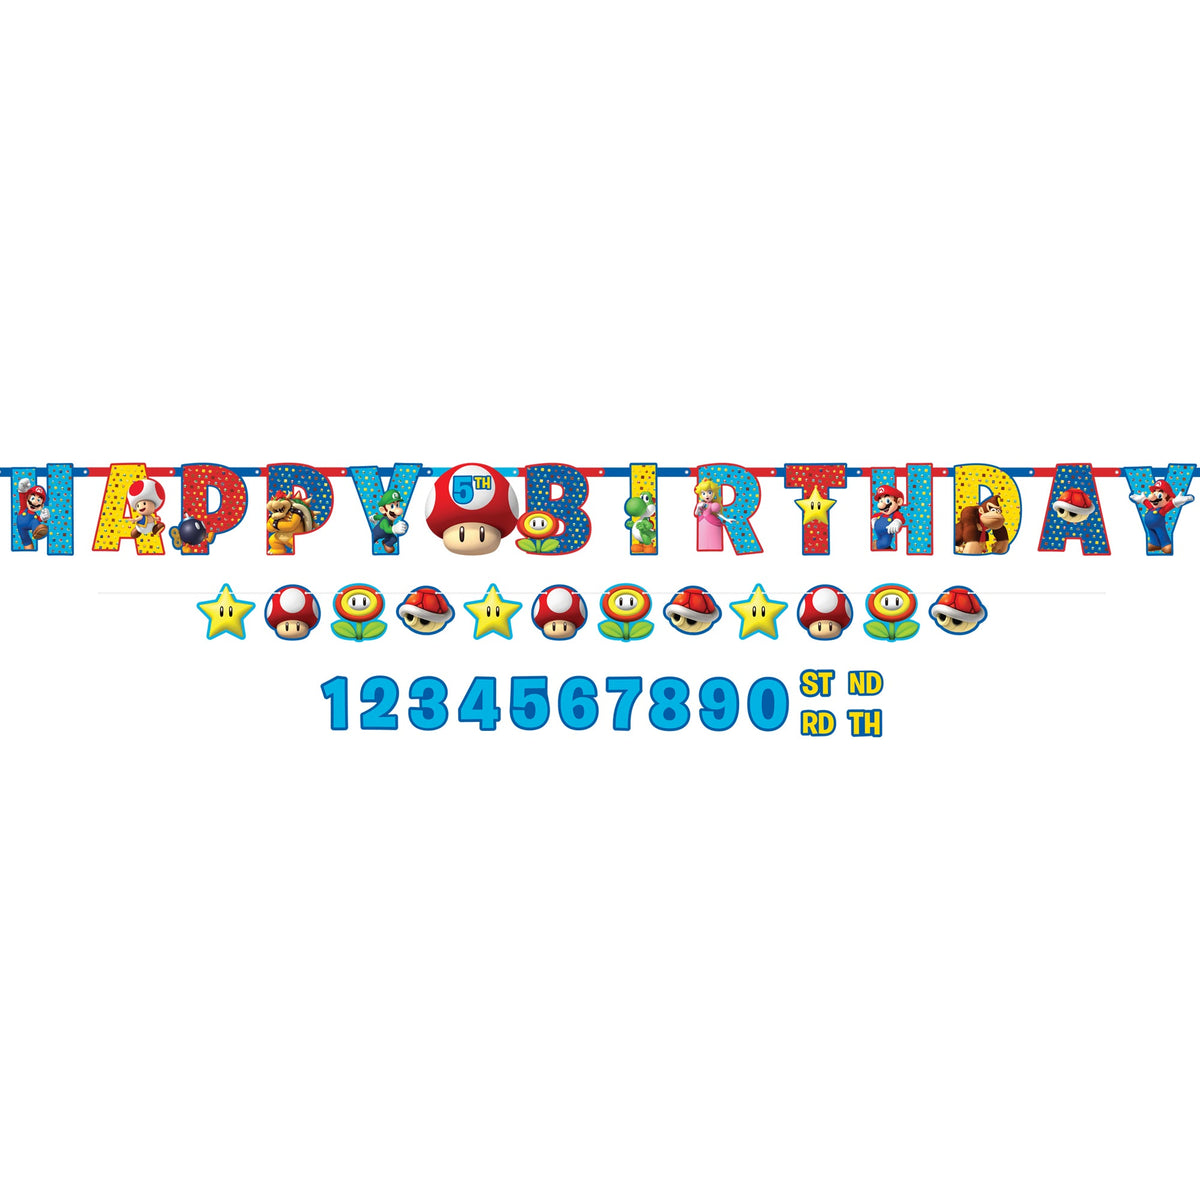 Super Mario Brothers Personalized Jumbo Letter Banner Kit with 1 "Happy (add age) birthday" Letter Banner:10 3/5' x 10" and 1 character cutouts  Smaller Banner: 6' x 5"